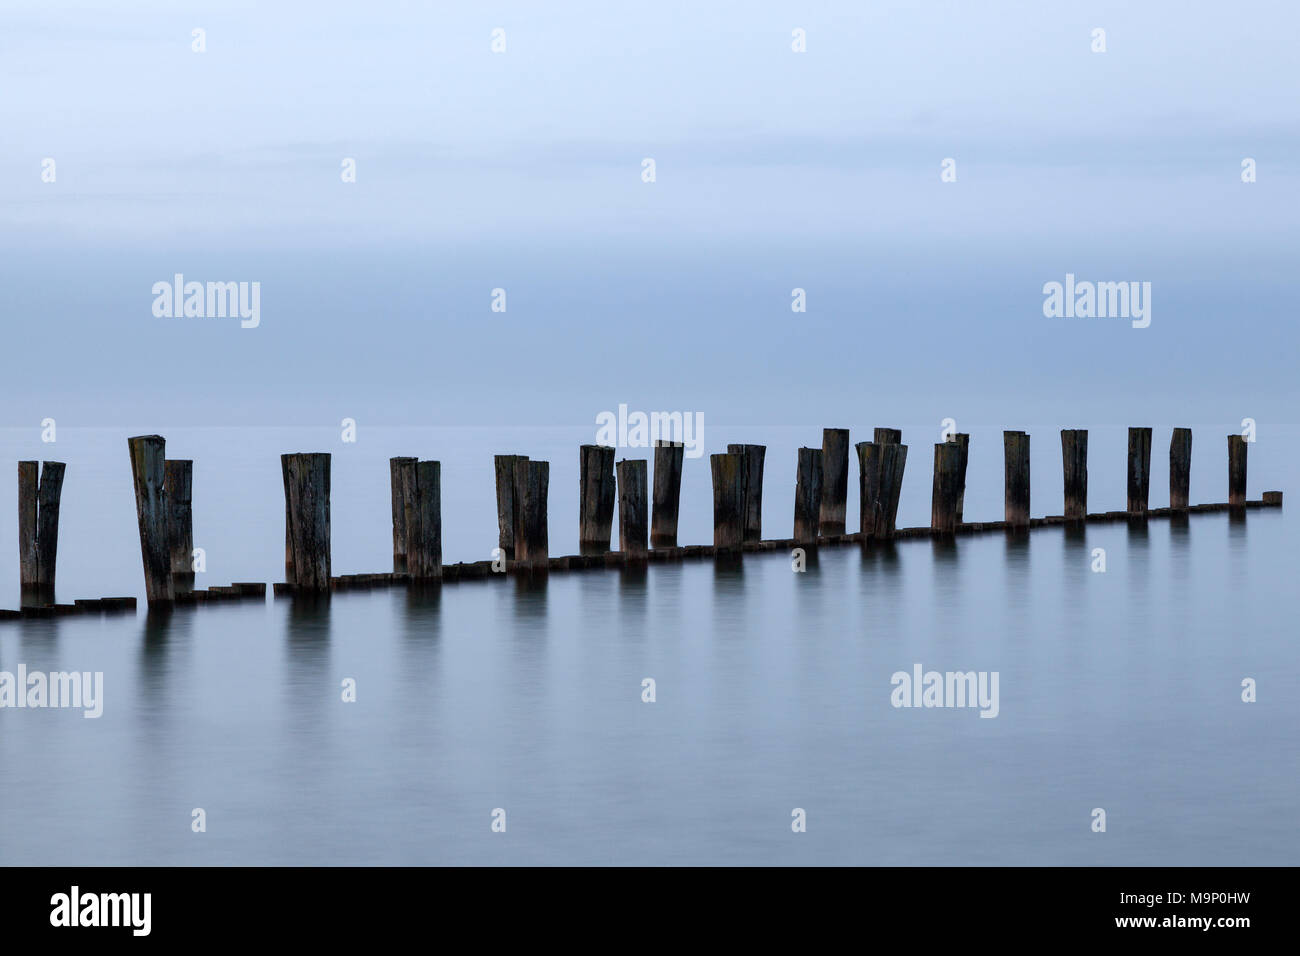 Groynes, wooden stages, long time exposure, Zingst, Fischland-Darß-Zingst, Western Pomerania Lagoon Area National Park Stock Photo